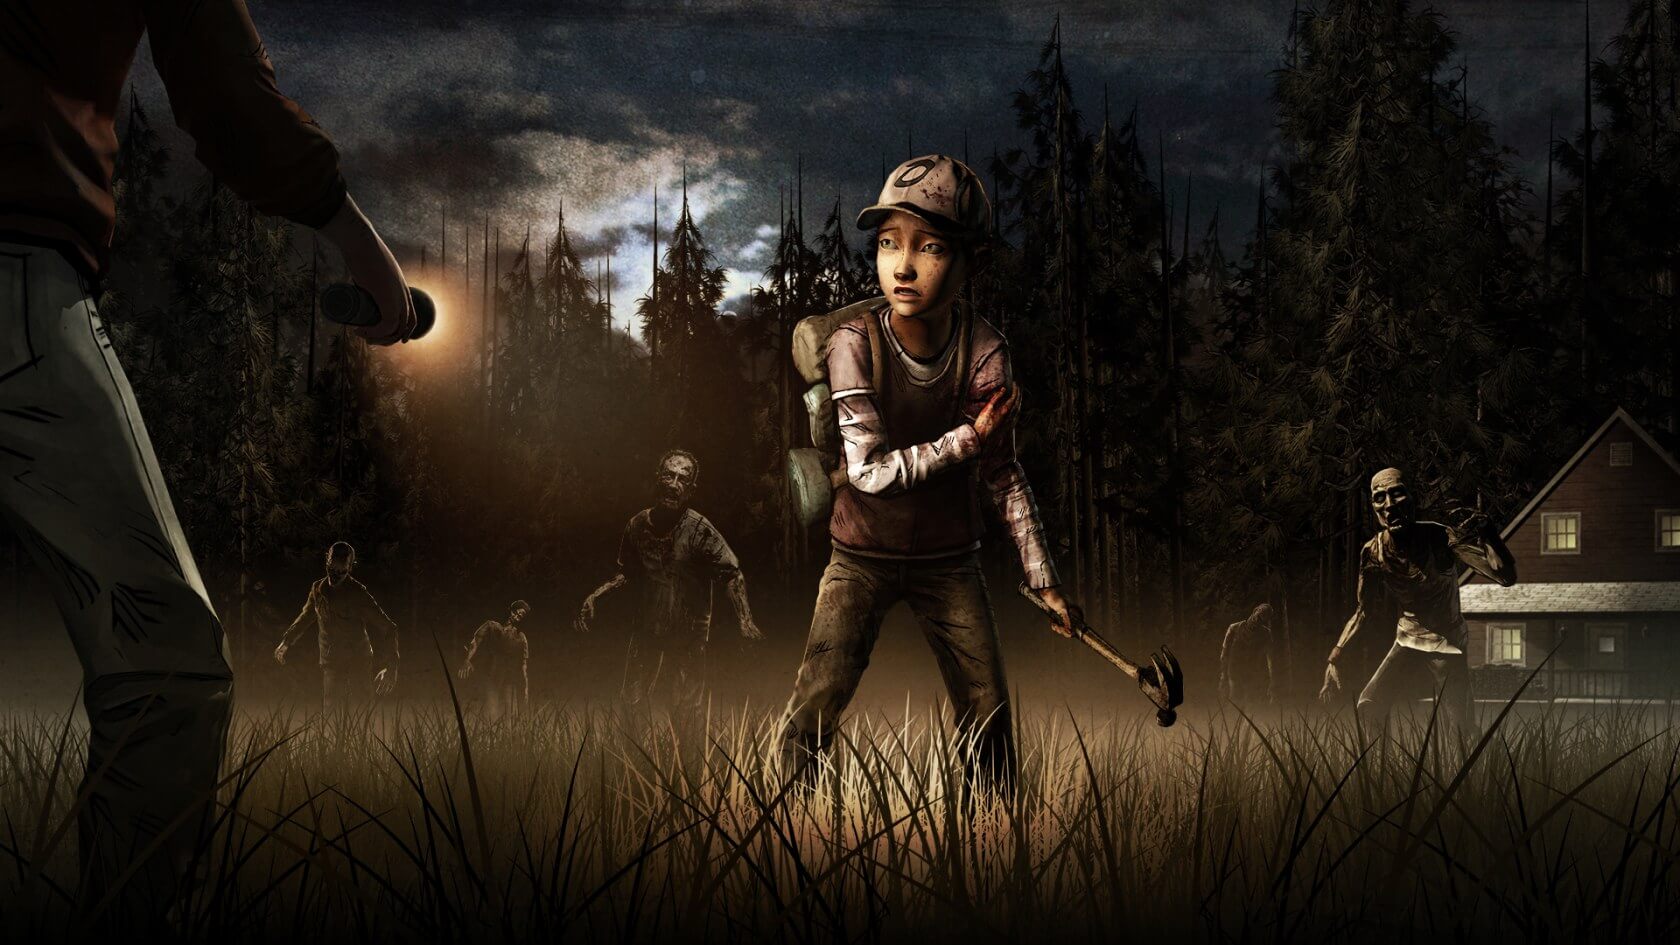 TellTale Games co-founder says company was scuttled by a single backer